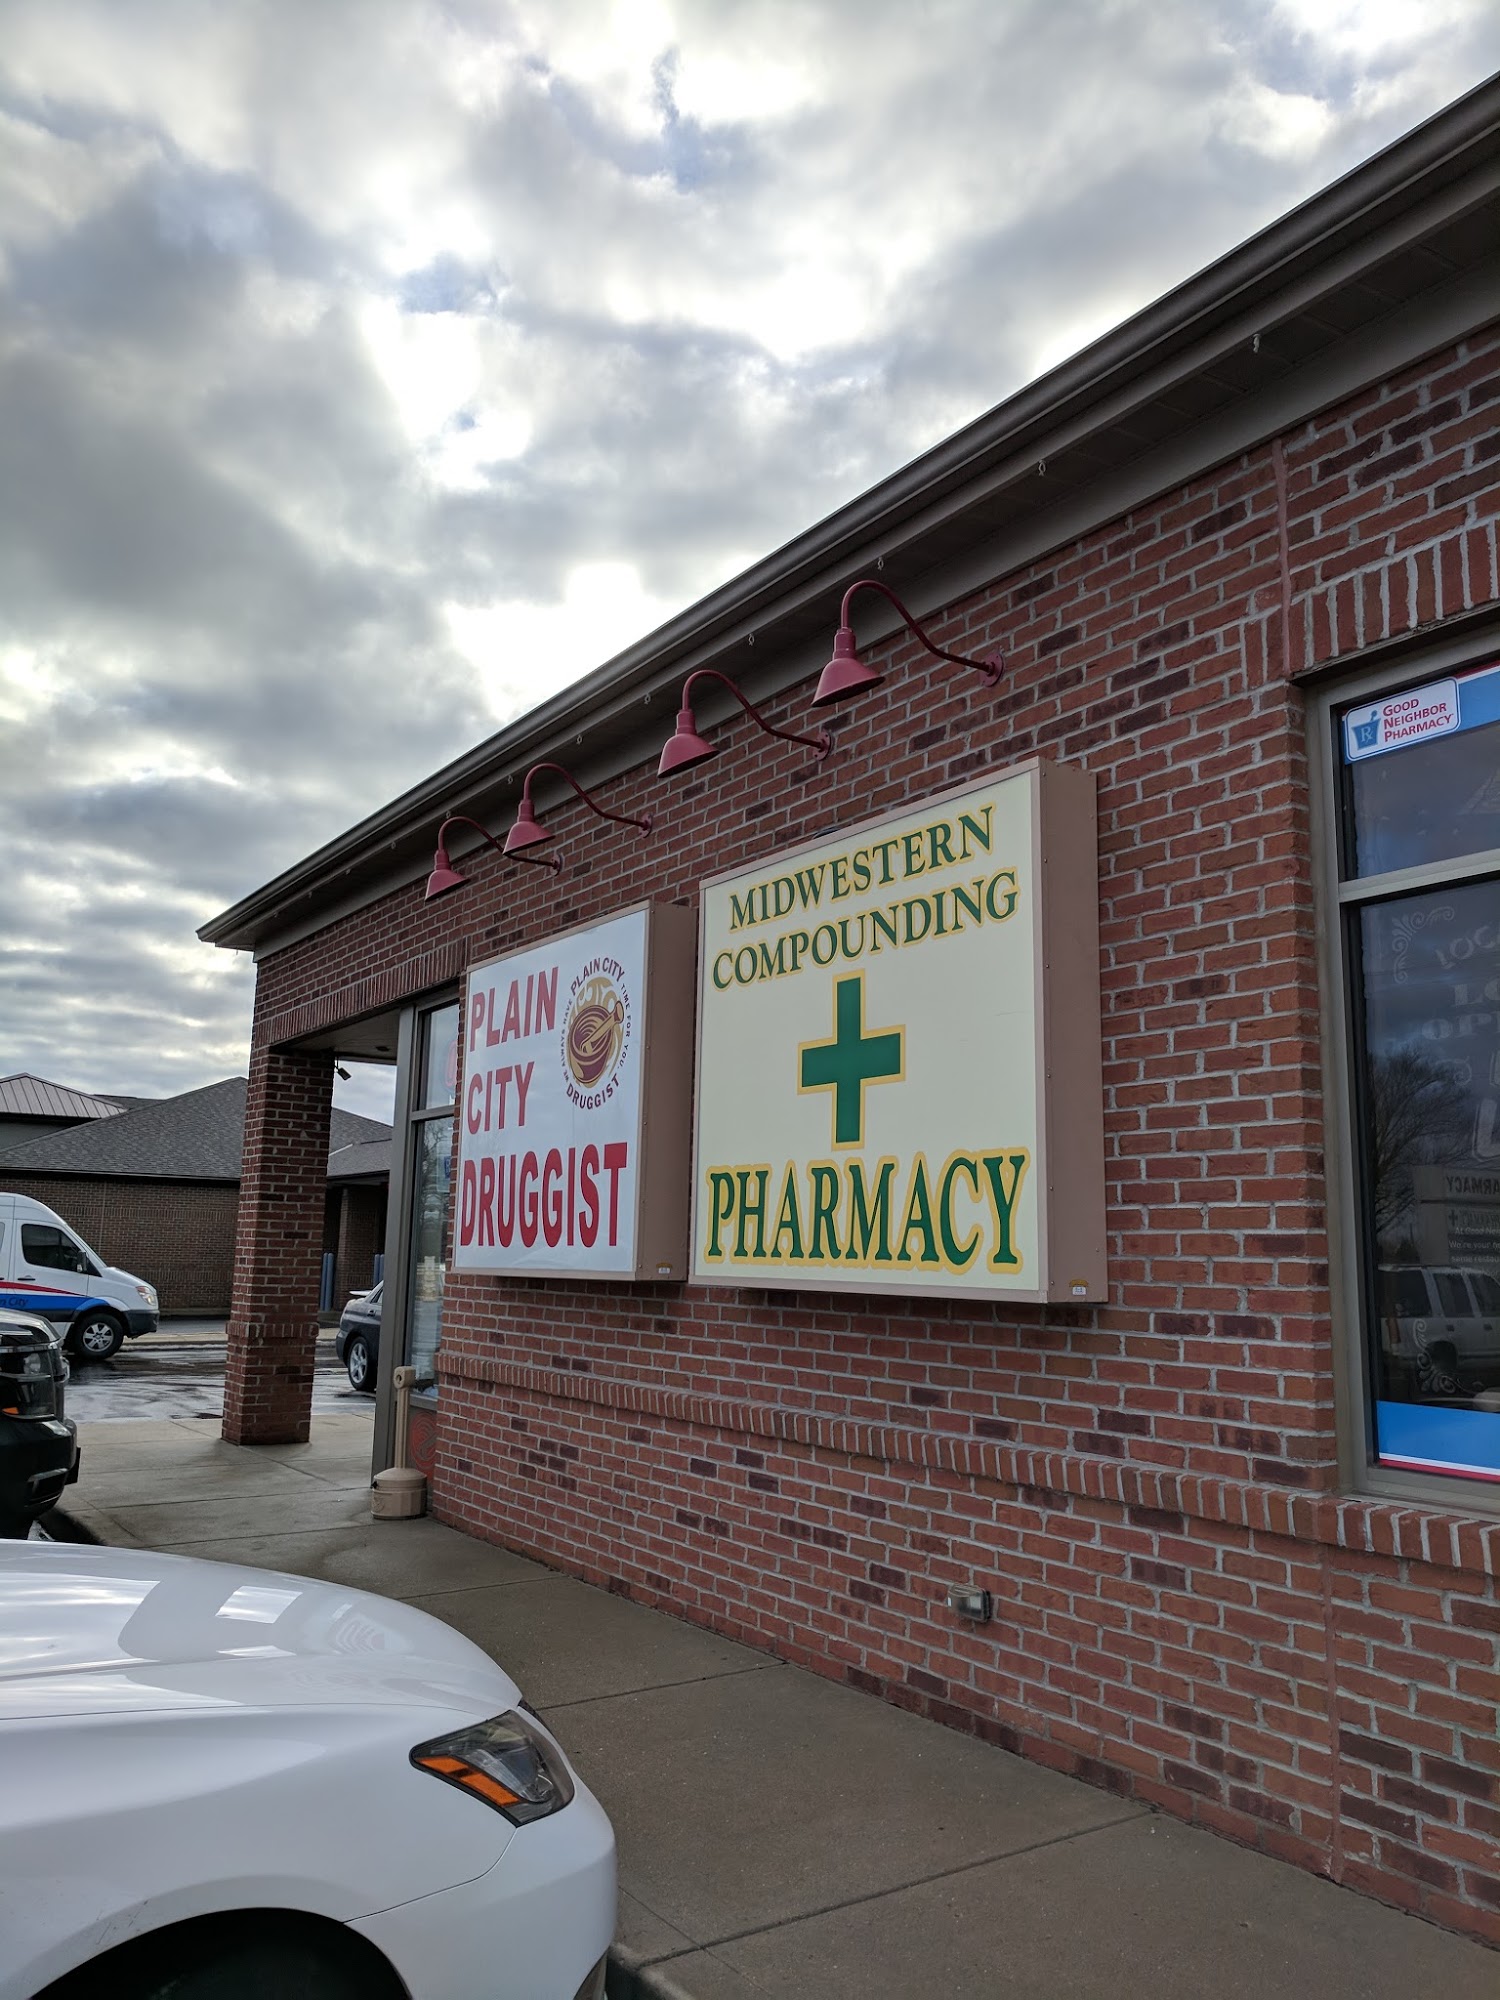 Midwestern Compounding Pharmacy